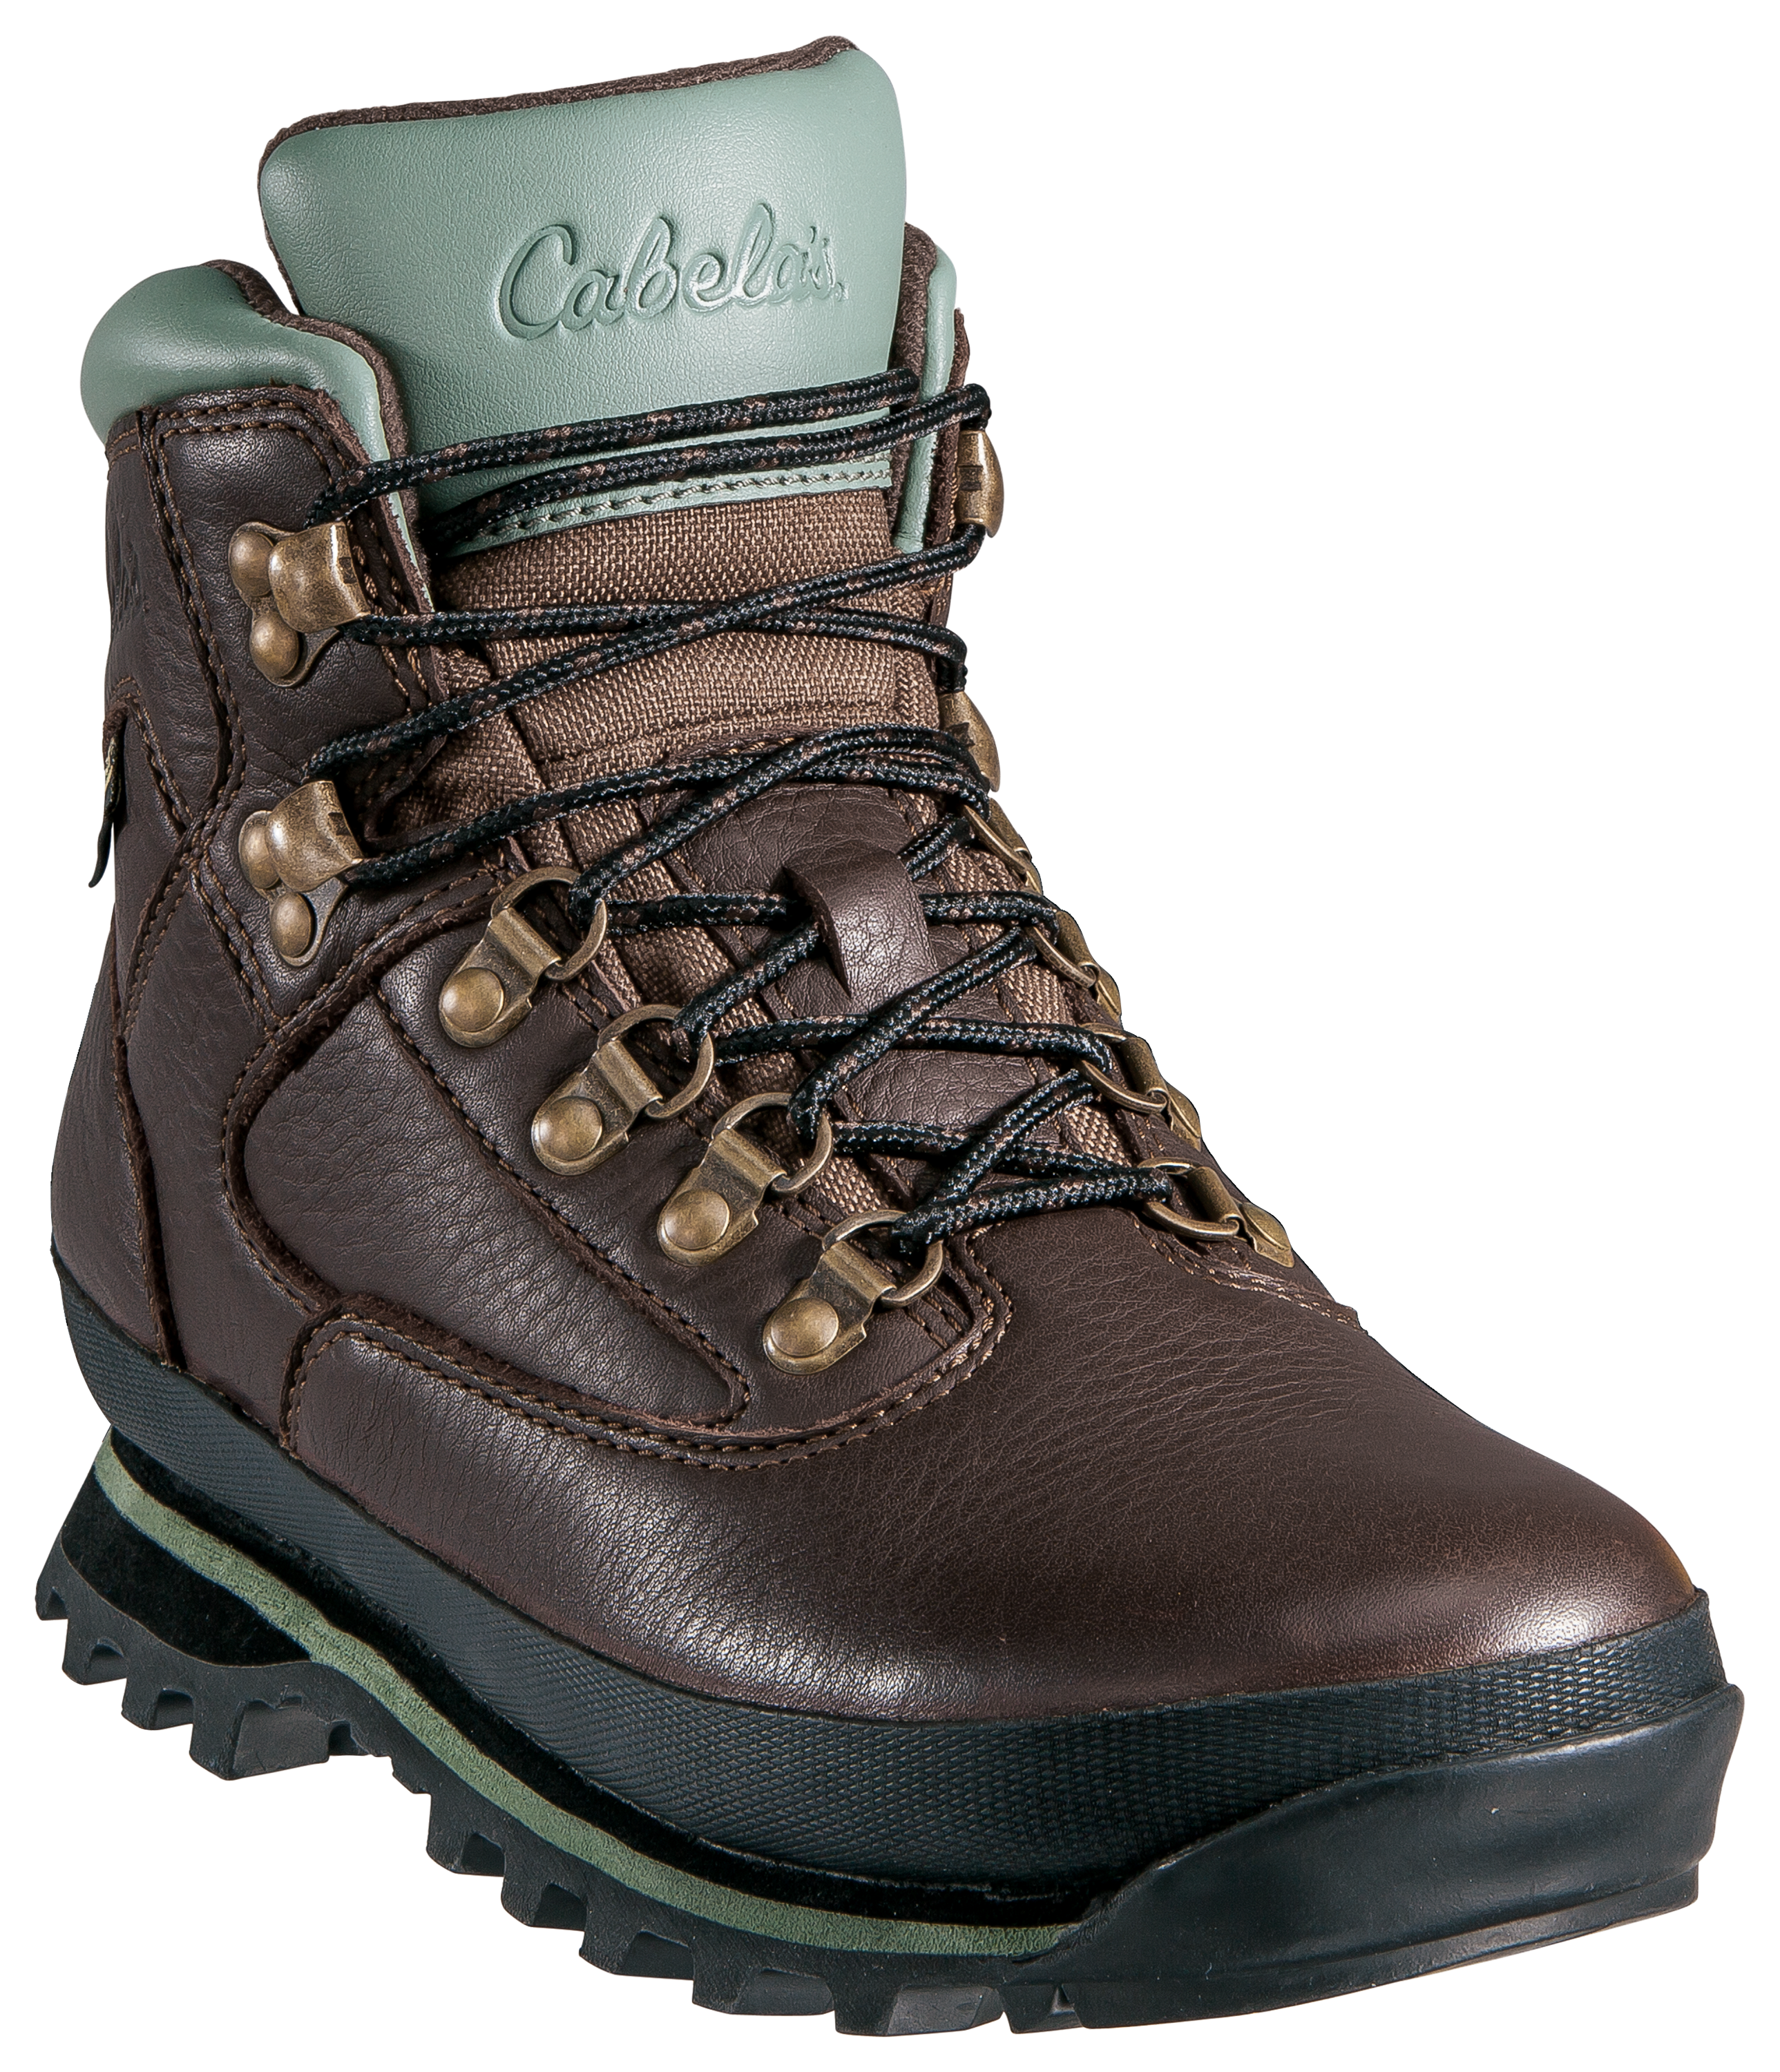 Cabela's Rimrock Mid GORE-TEX Hiking Boots for Ladies - Brown - 9 M